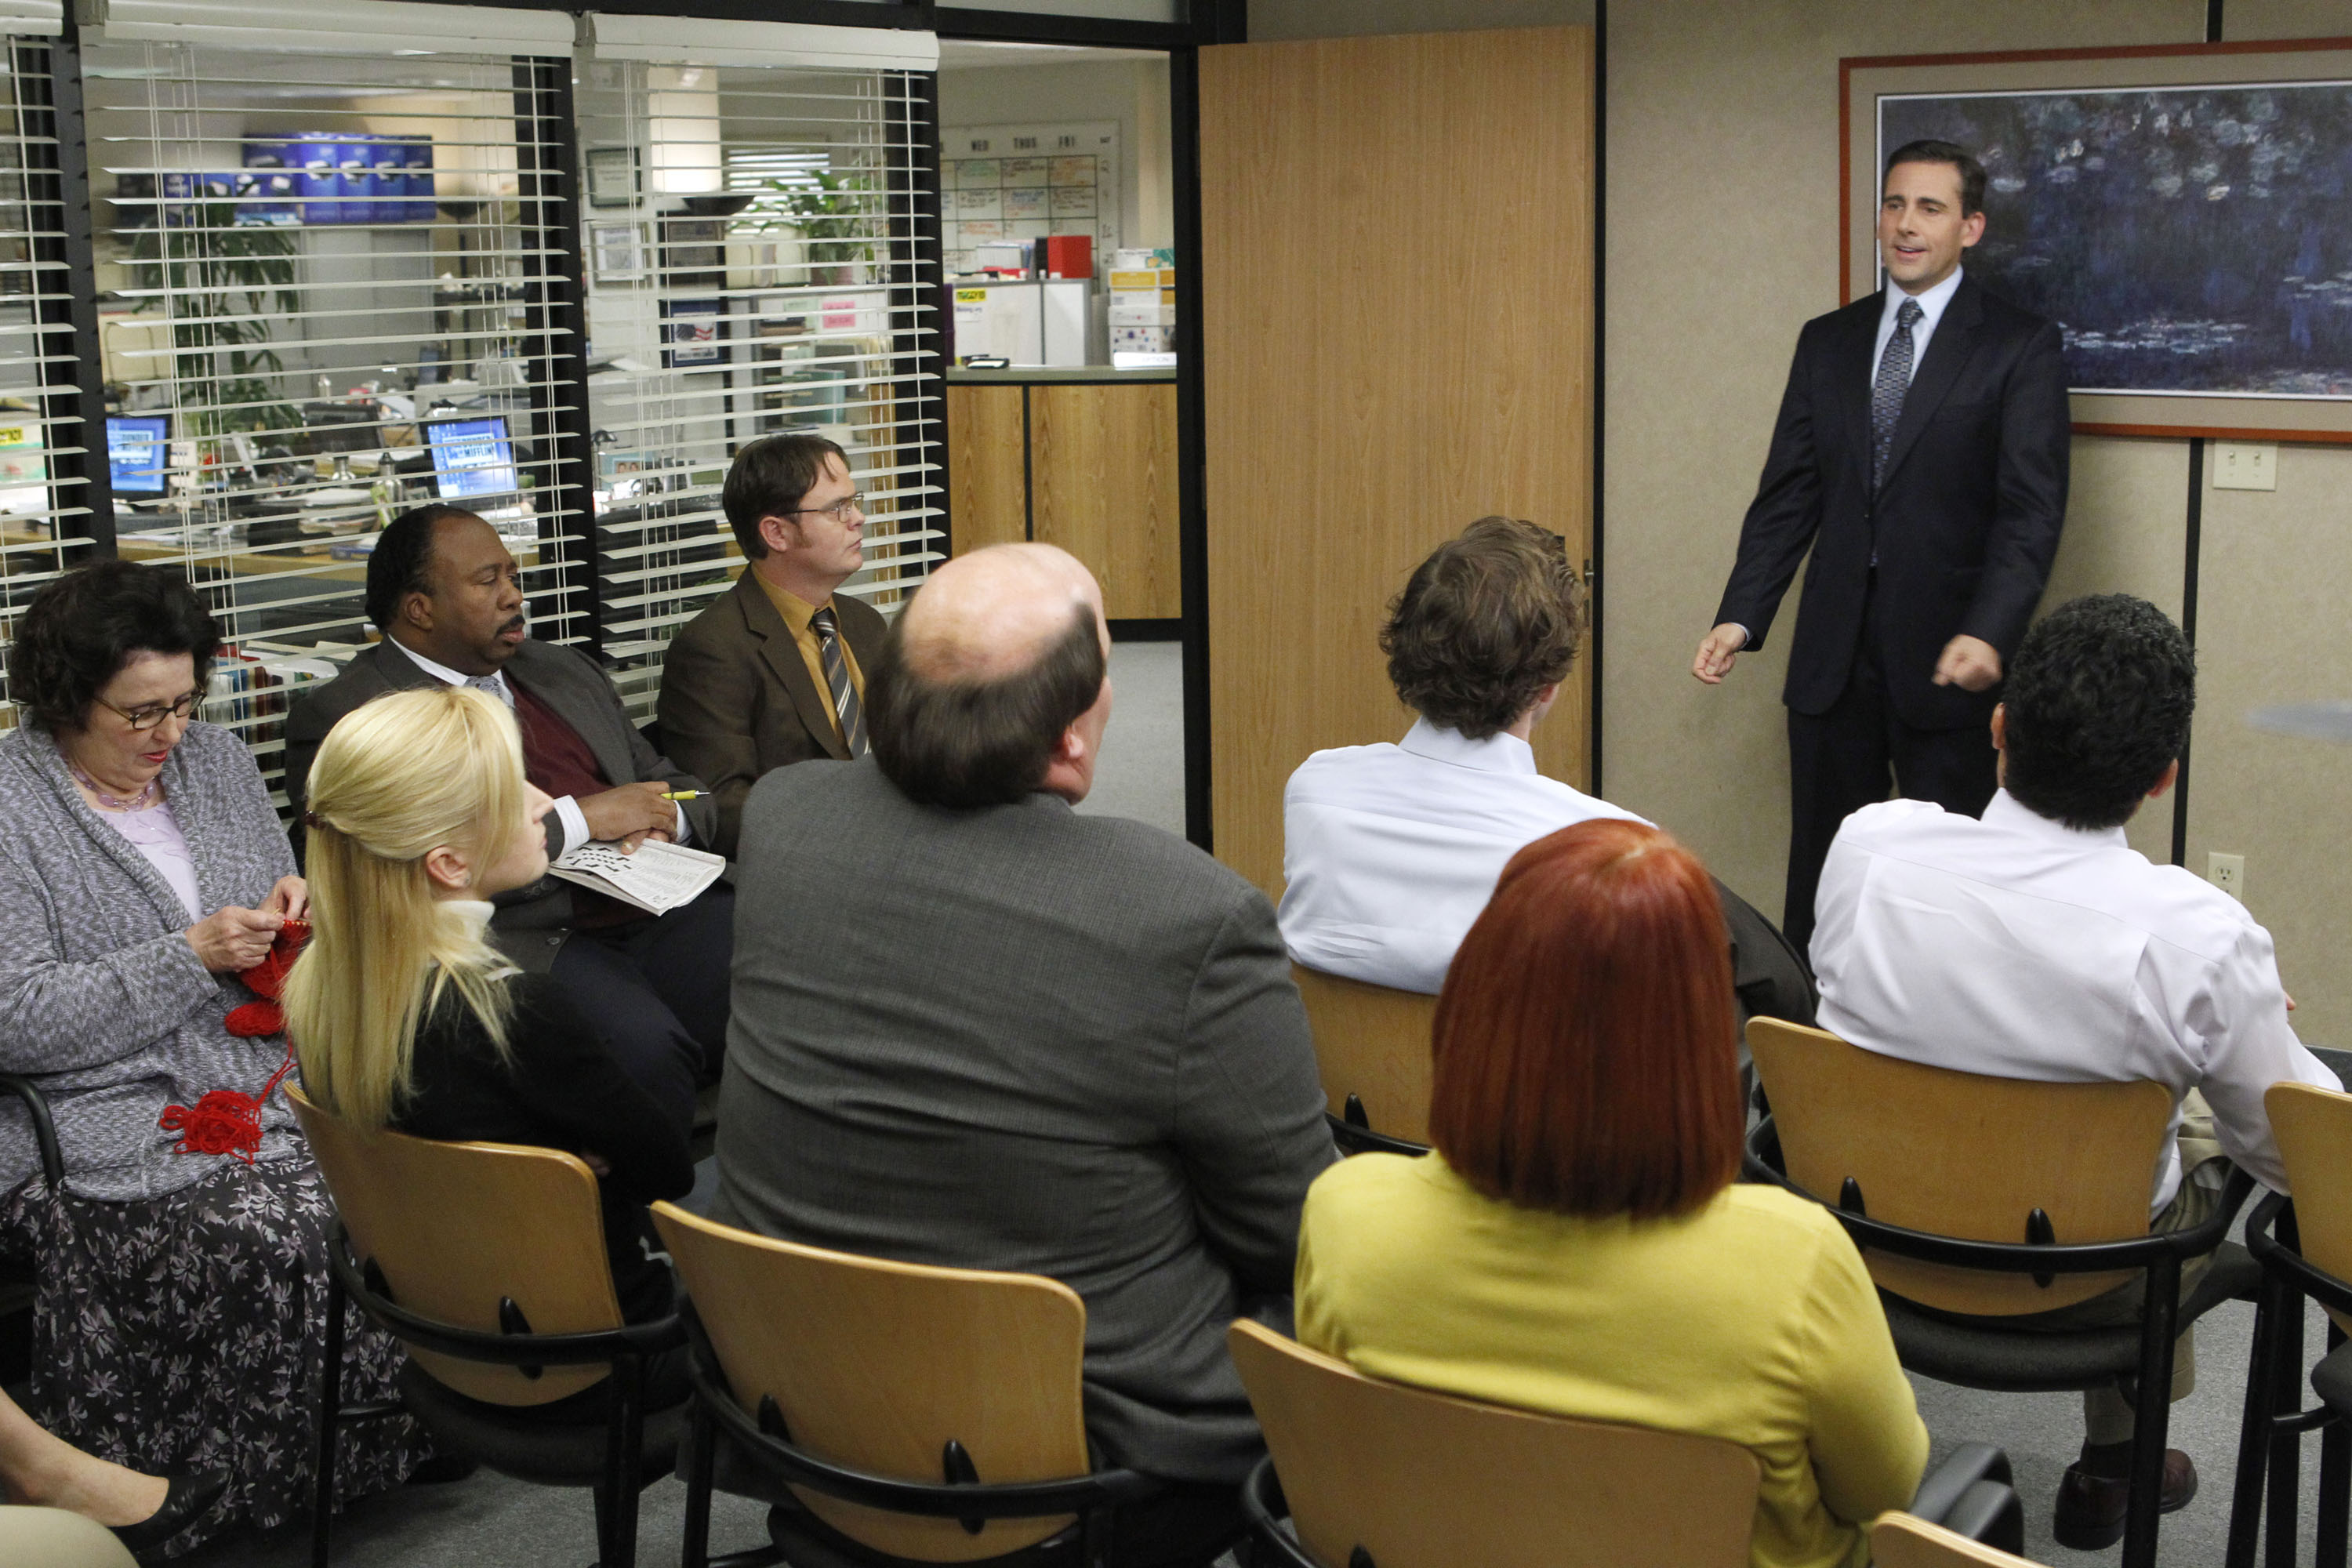 The Office': Conference Room Scenes Were a 'Black Hole,' but Nothing  Stopped Production Like These 2 Characters